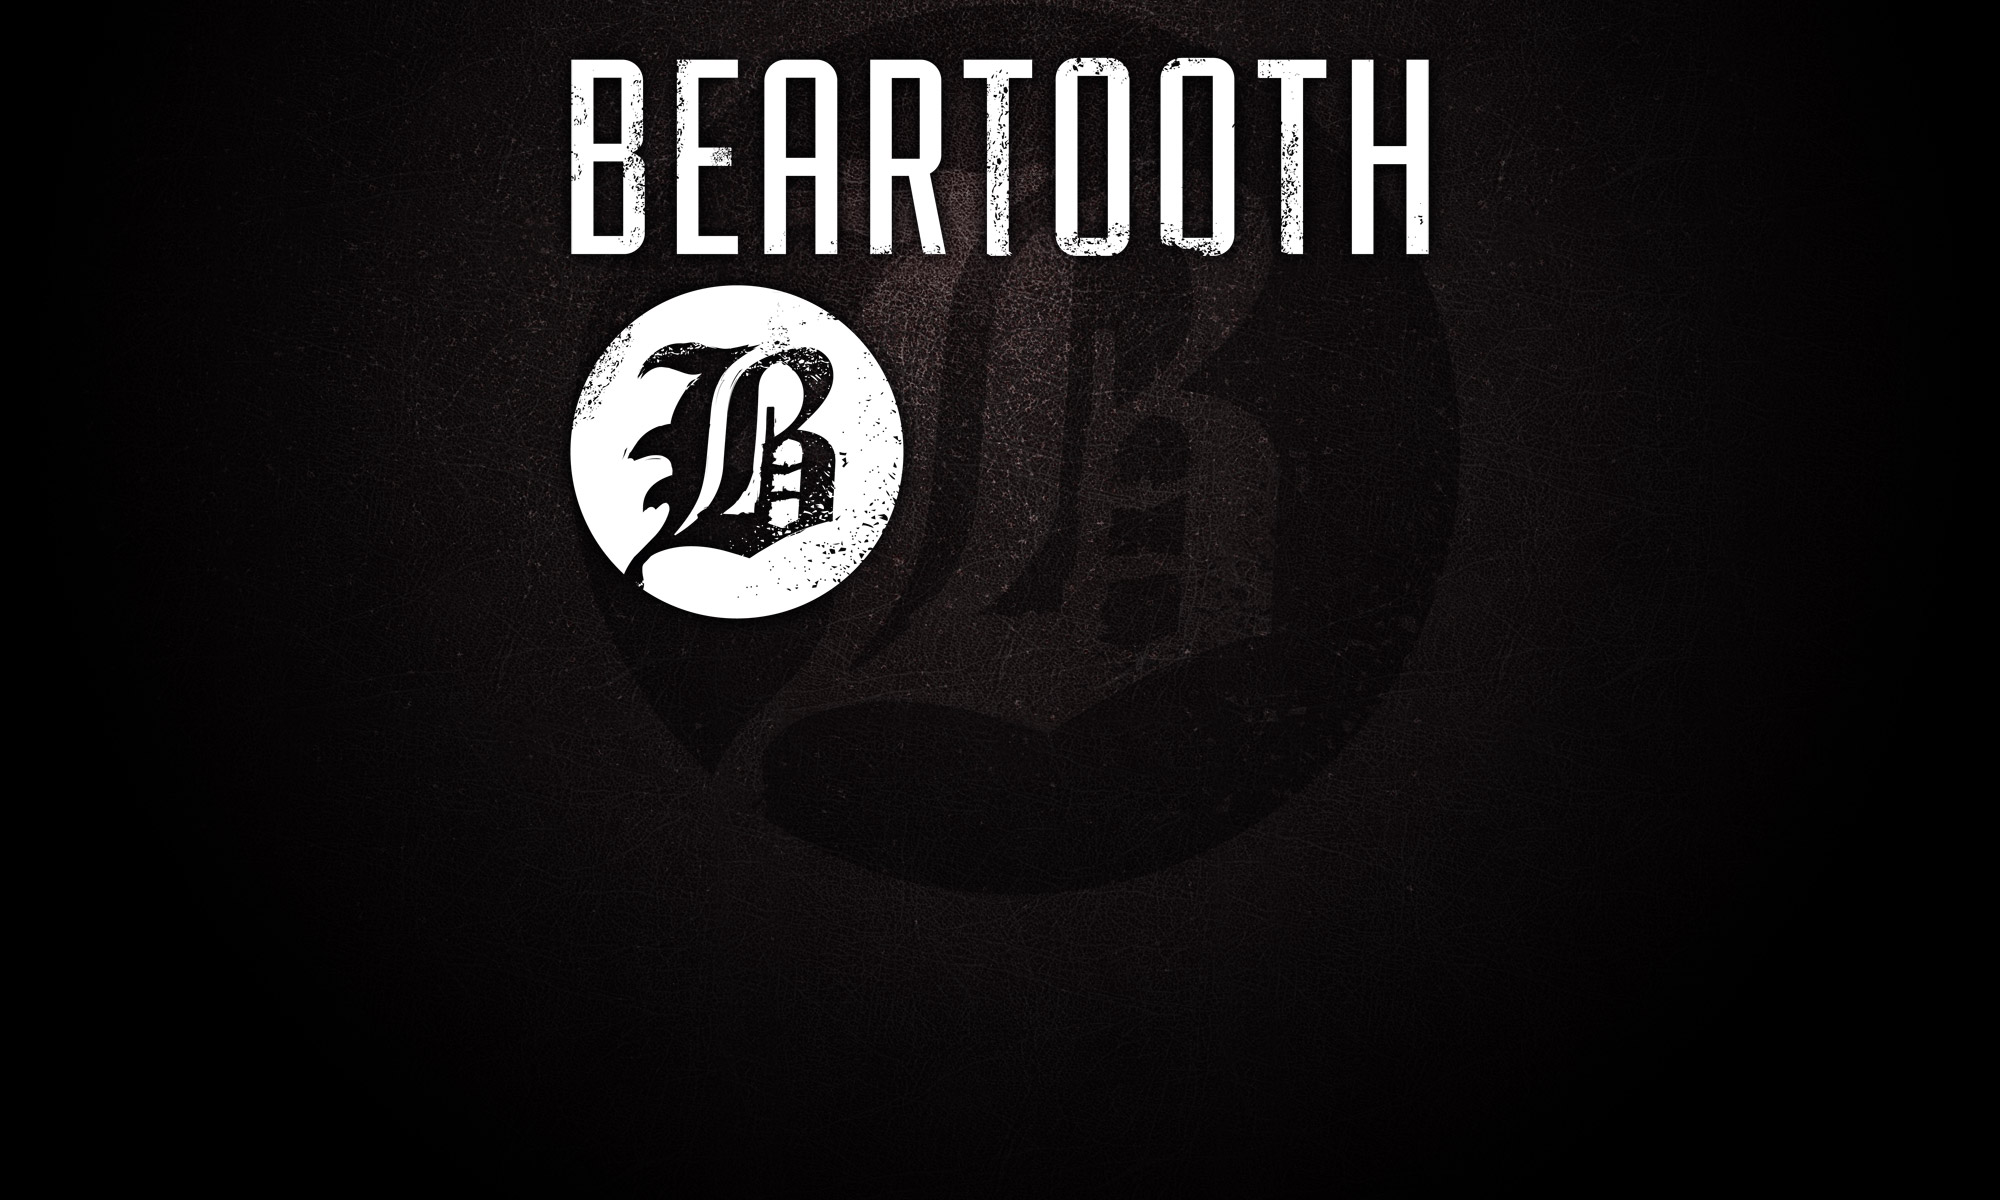 Beartooth band logo in white on a dark, textured background, suitable for an HD desktop wallpaper.